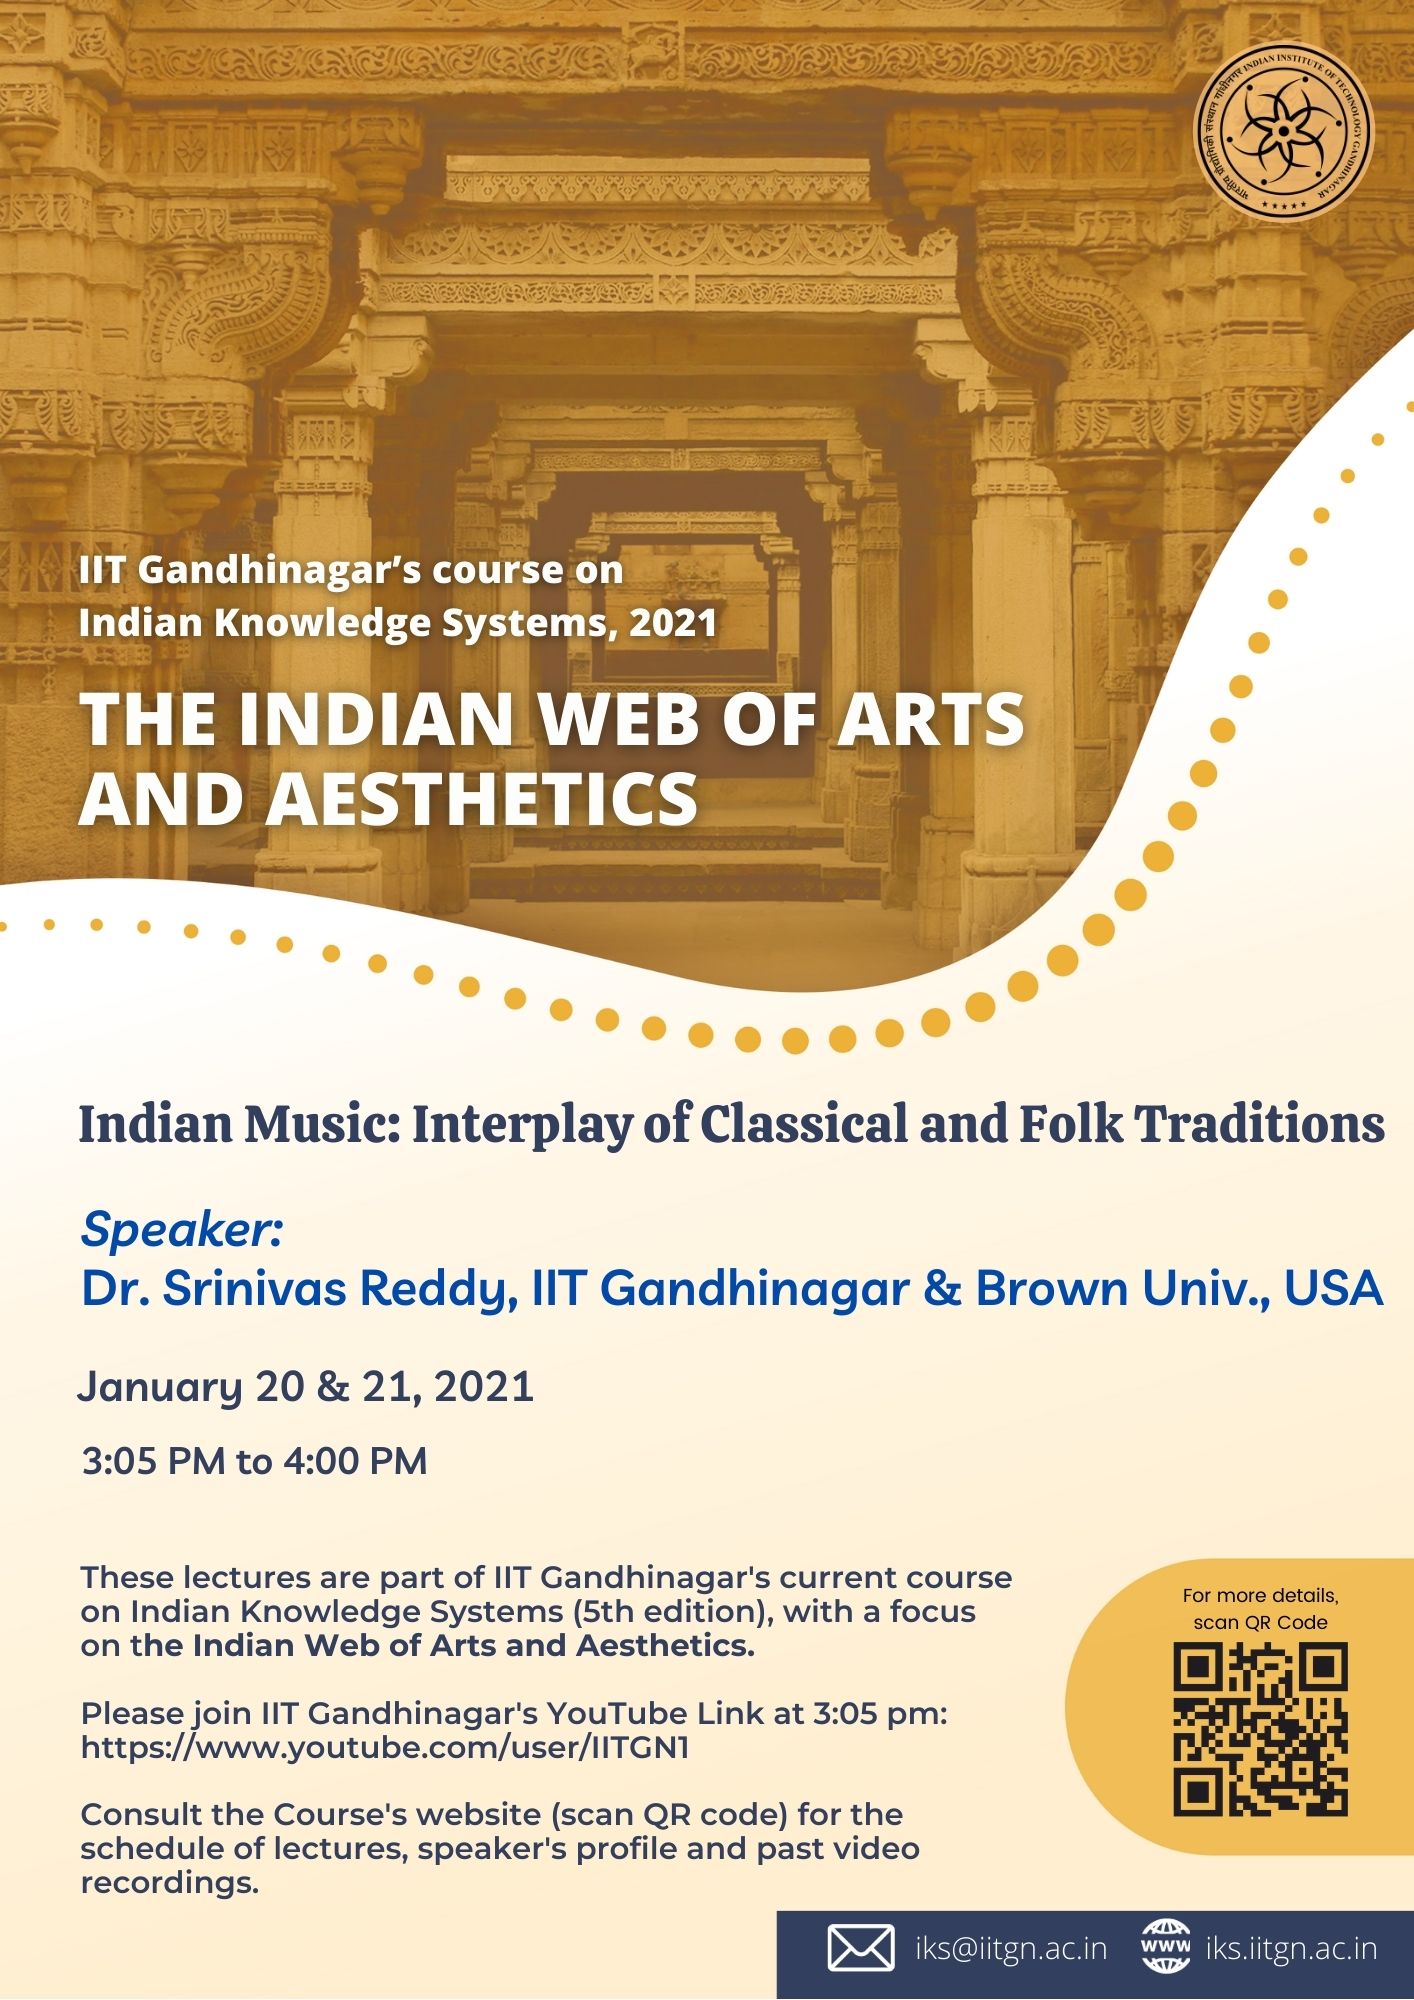 A course on Indian knowledge systems at IIT Gandhinagar